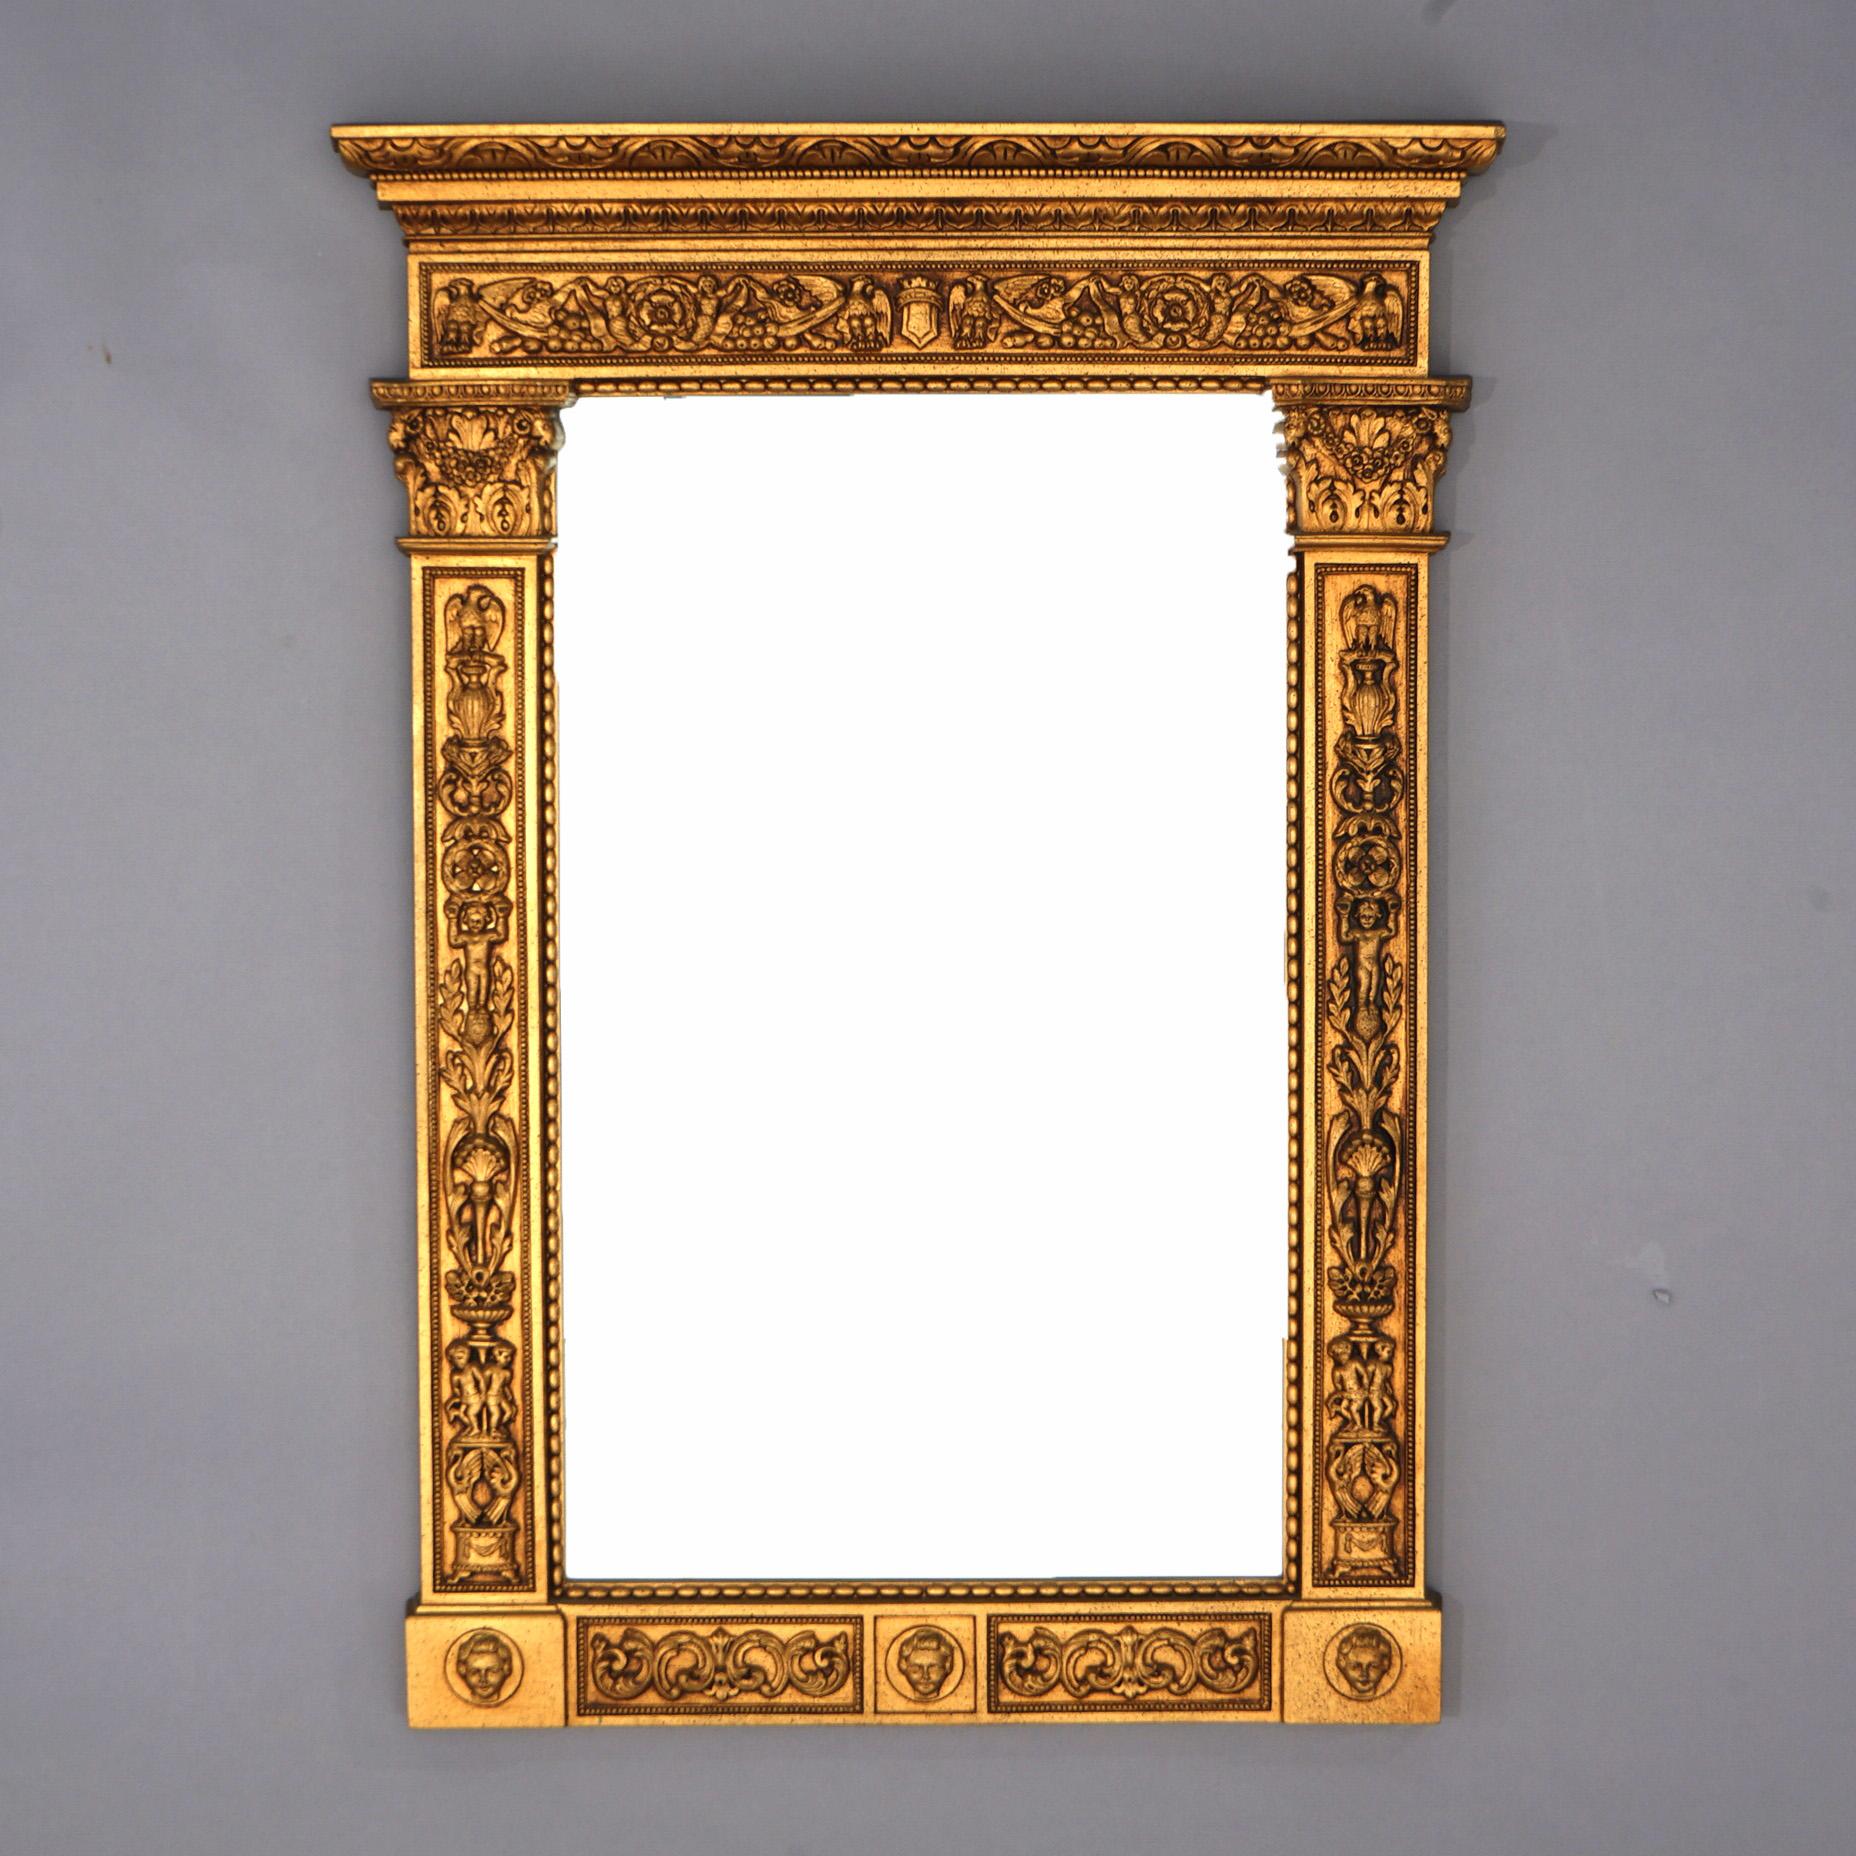 An antique Federal style Wall mirror offers gold finish with eagles, masks, foliate elements and caryatids, c1920

Measures - 34.5